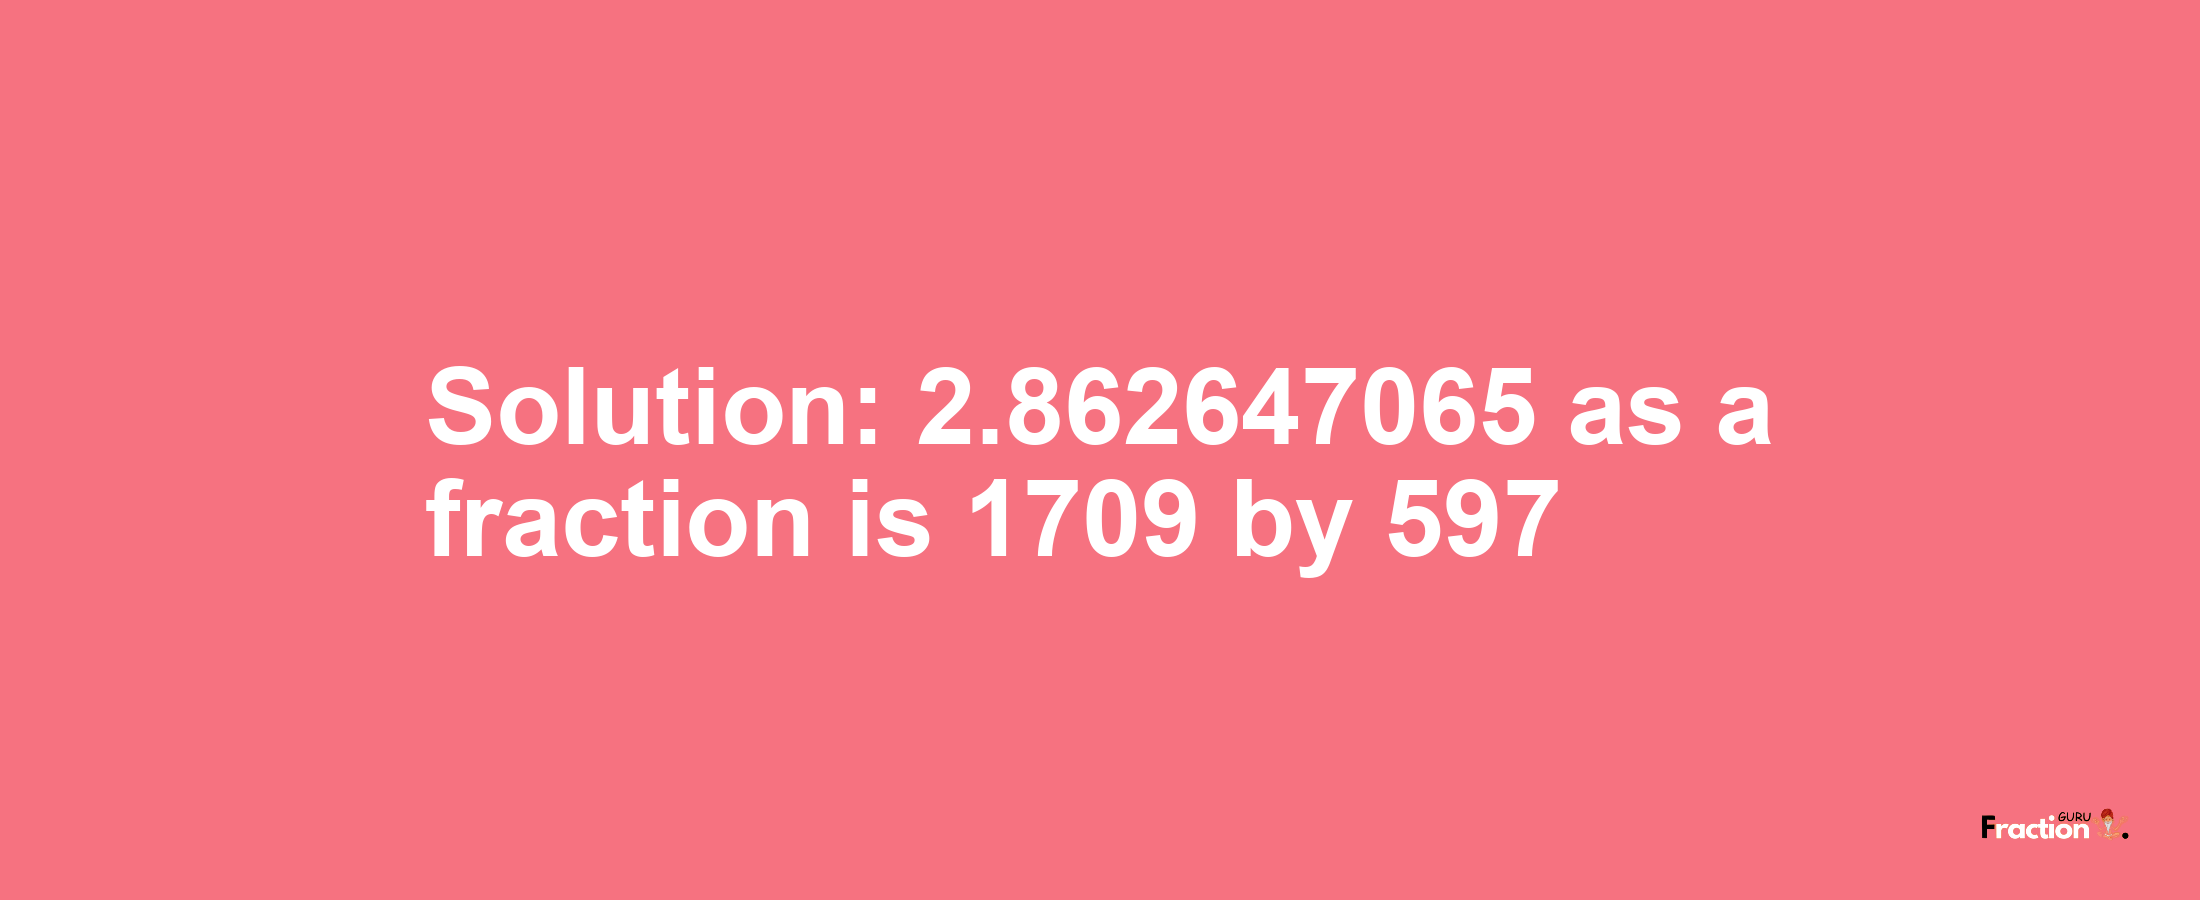 Solution:2.862647065 as a fraction is 1709/597